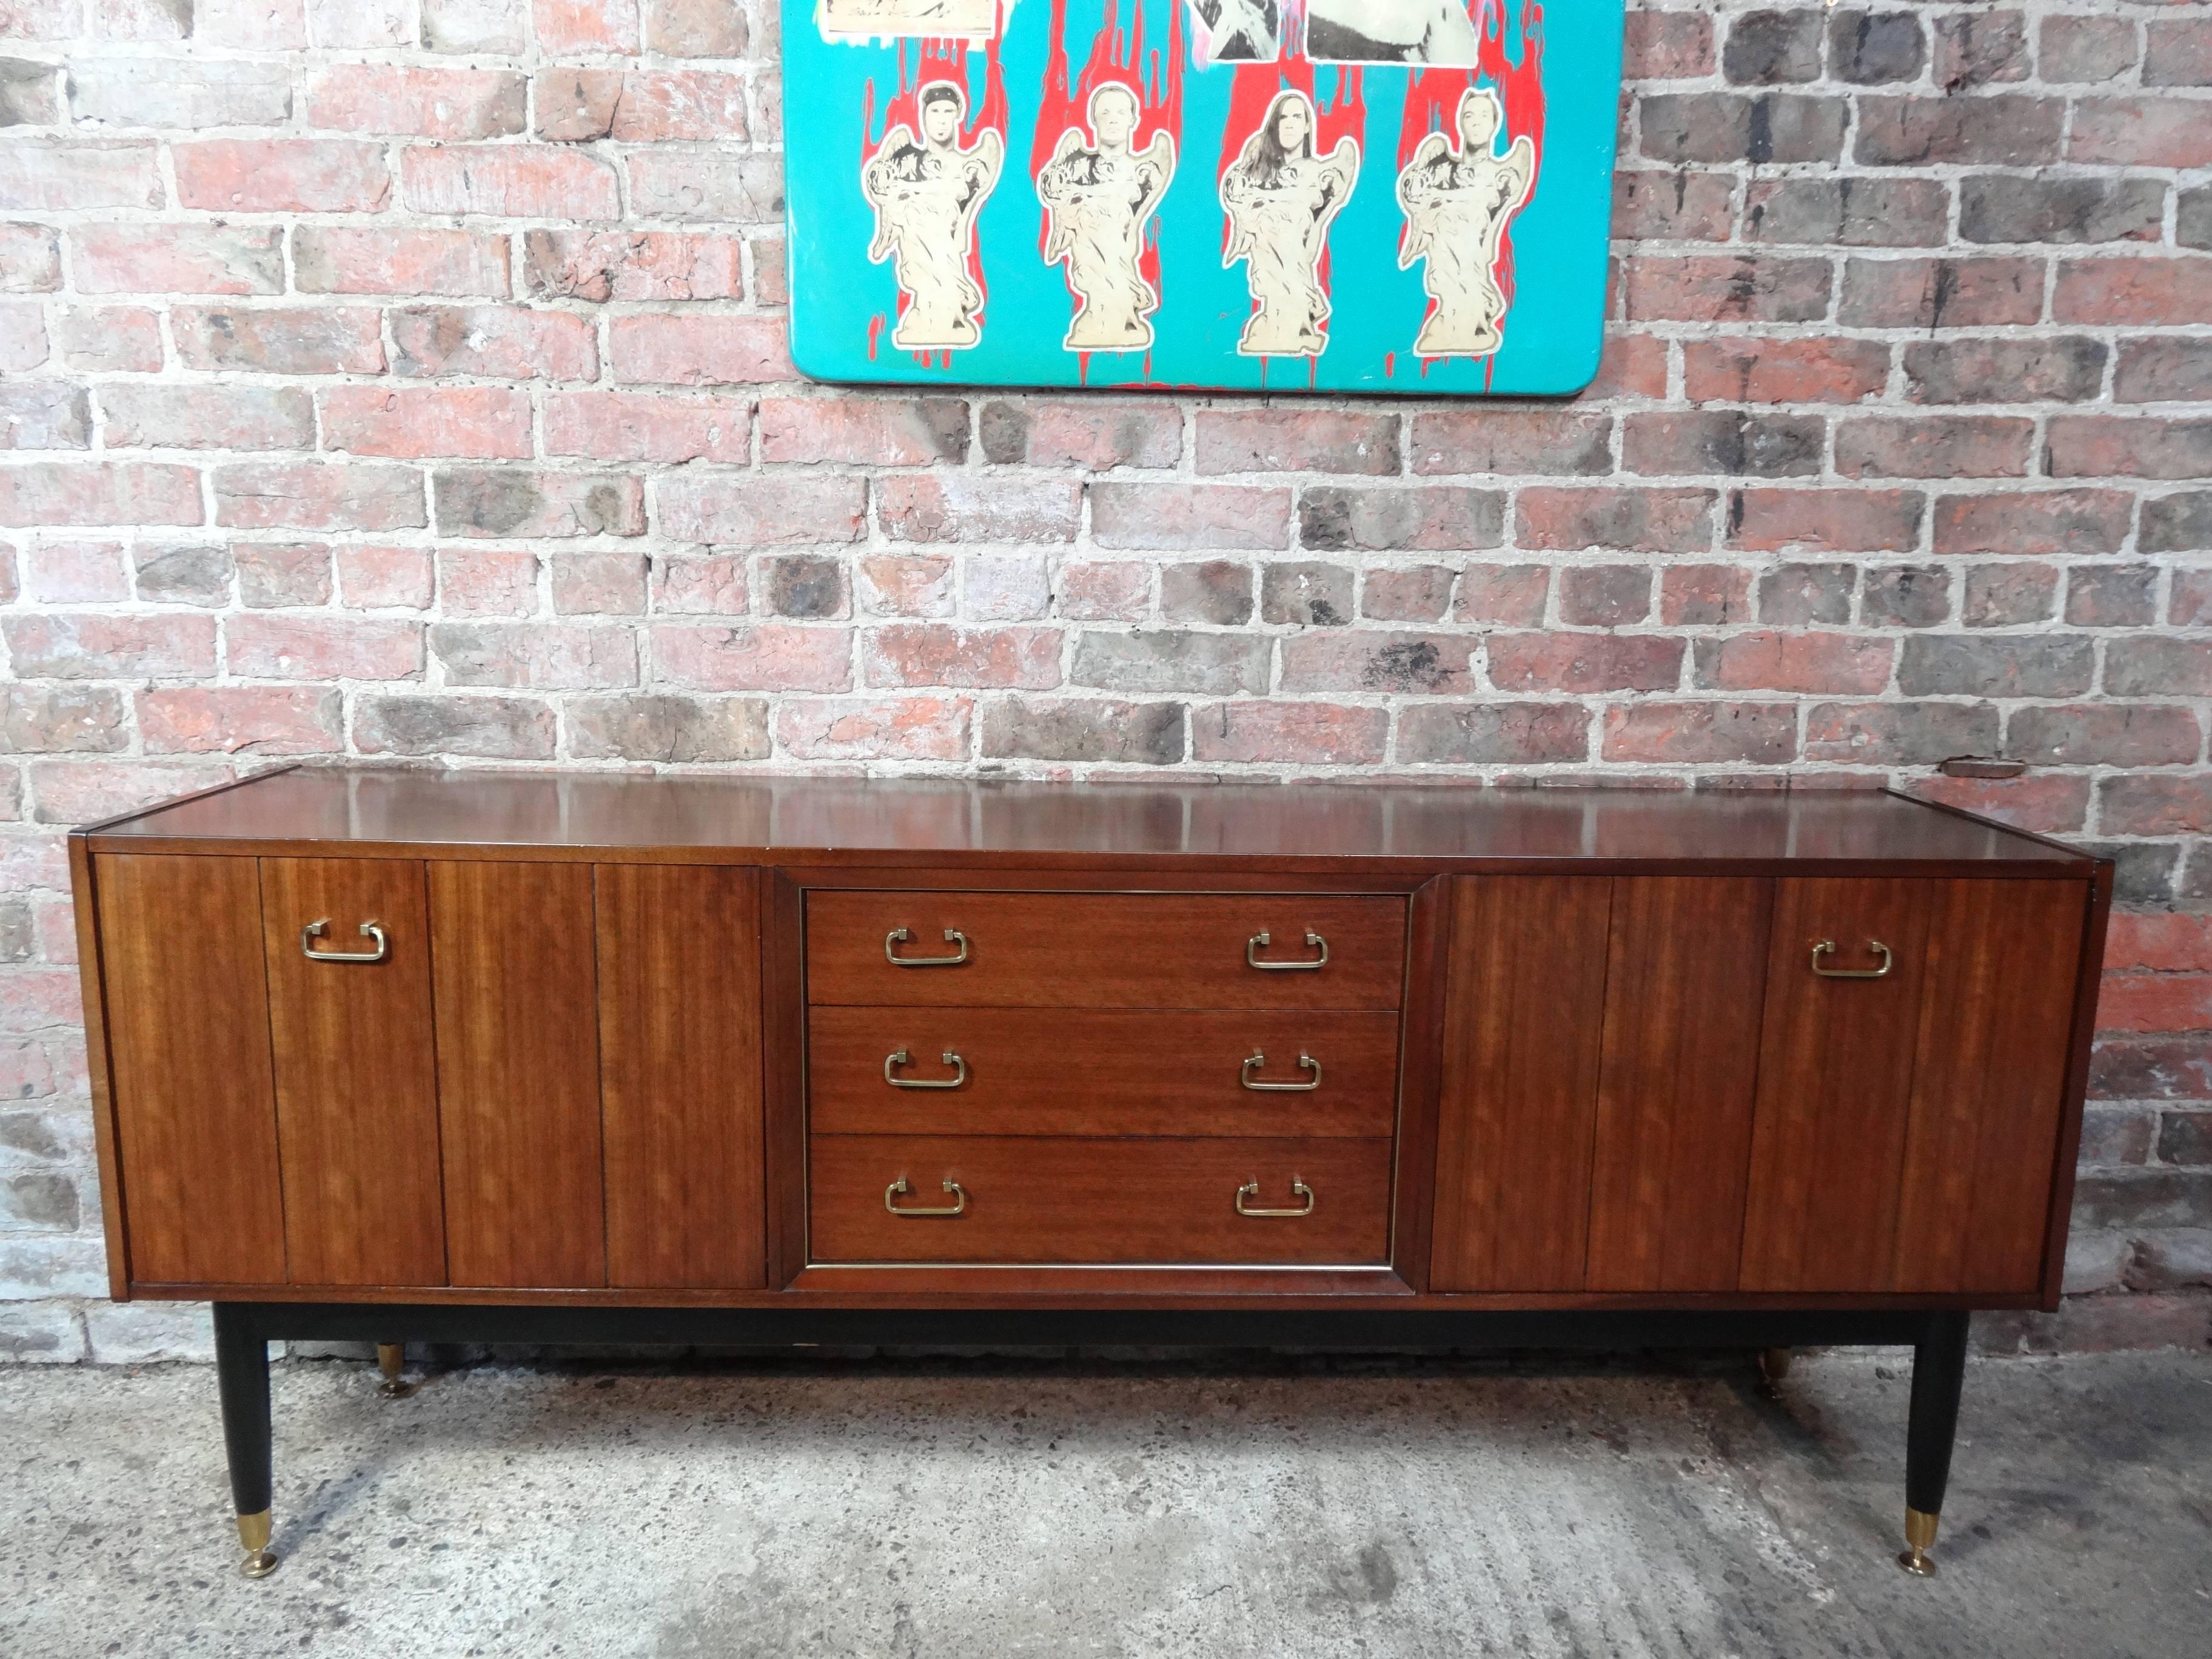 Sought after vintage retro E Gomme teak sideboard with brass handles and feet its from early 1950s. It has three drawers, cupboard space with lovely brass handles on the byfolding doors. Credenza is in very good original condition.